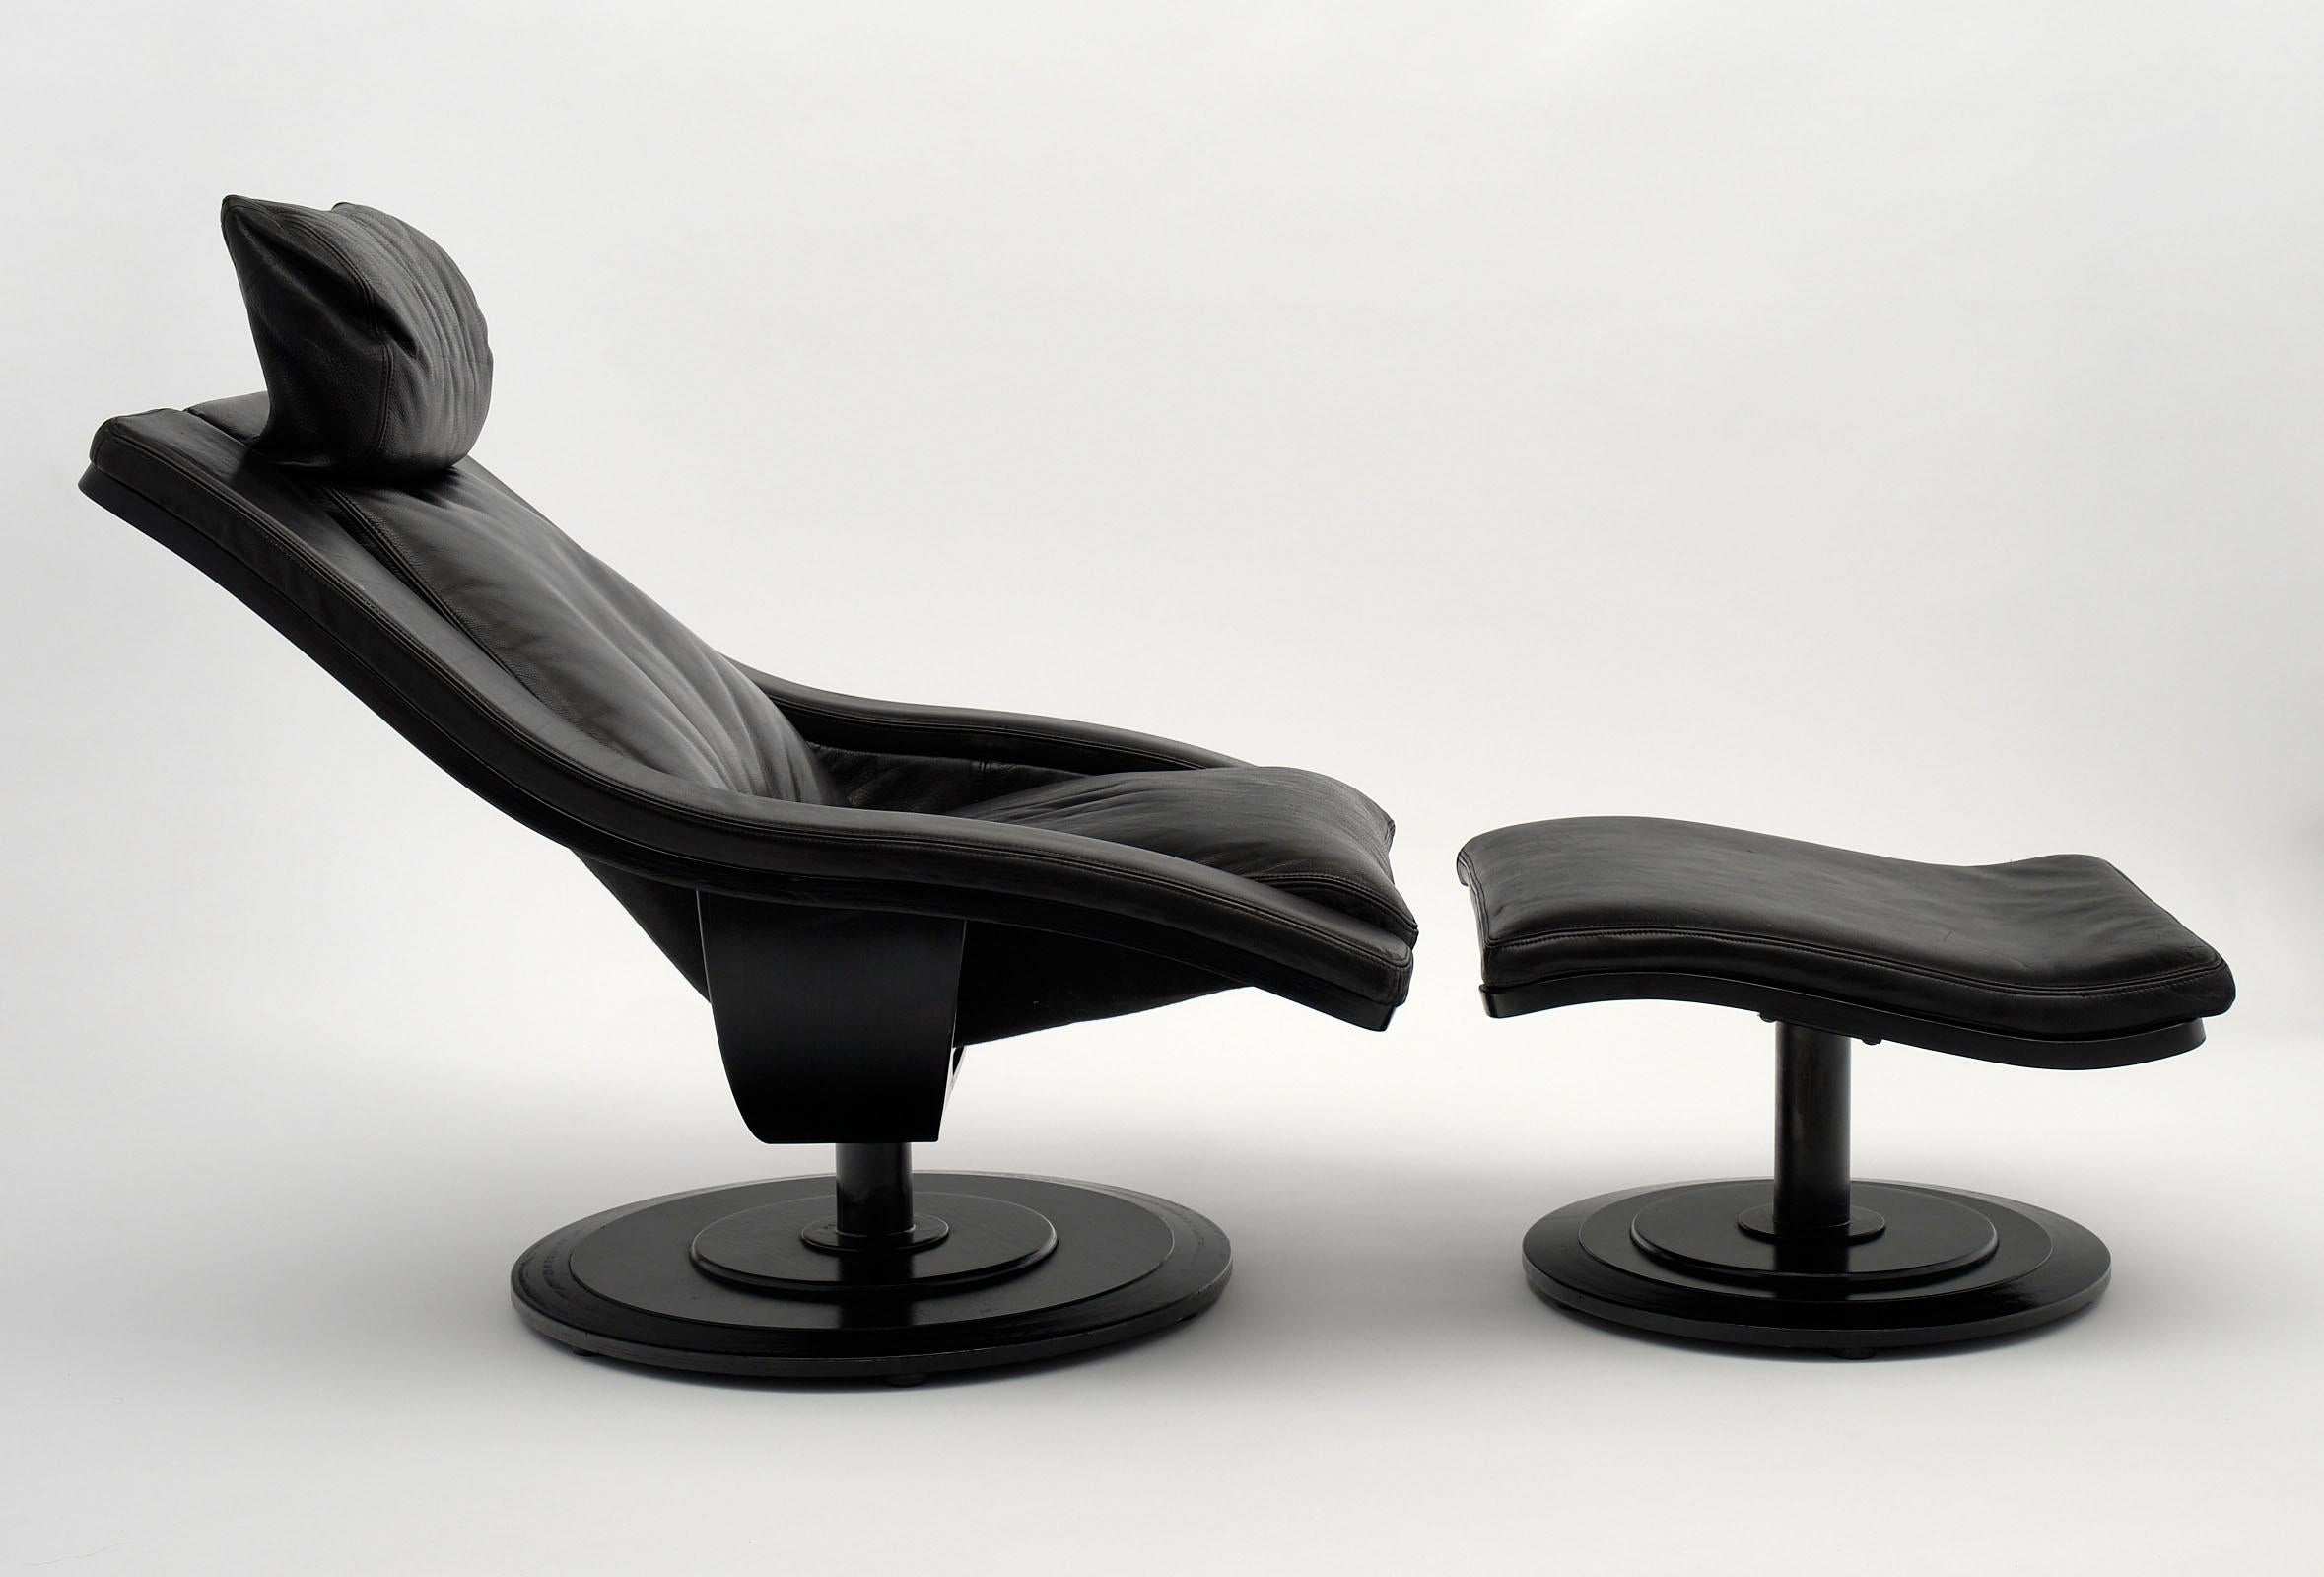 Akamura & Marquadsen for Nelo armchair, black leather armchair and ottoman with swiveling capabilities. The spheric black lacquered bases support this unique piece. They are signed. The listed dimensions are for the chair. The added depth with the